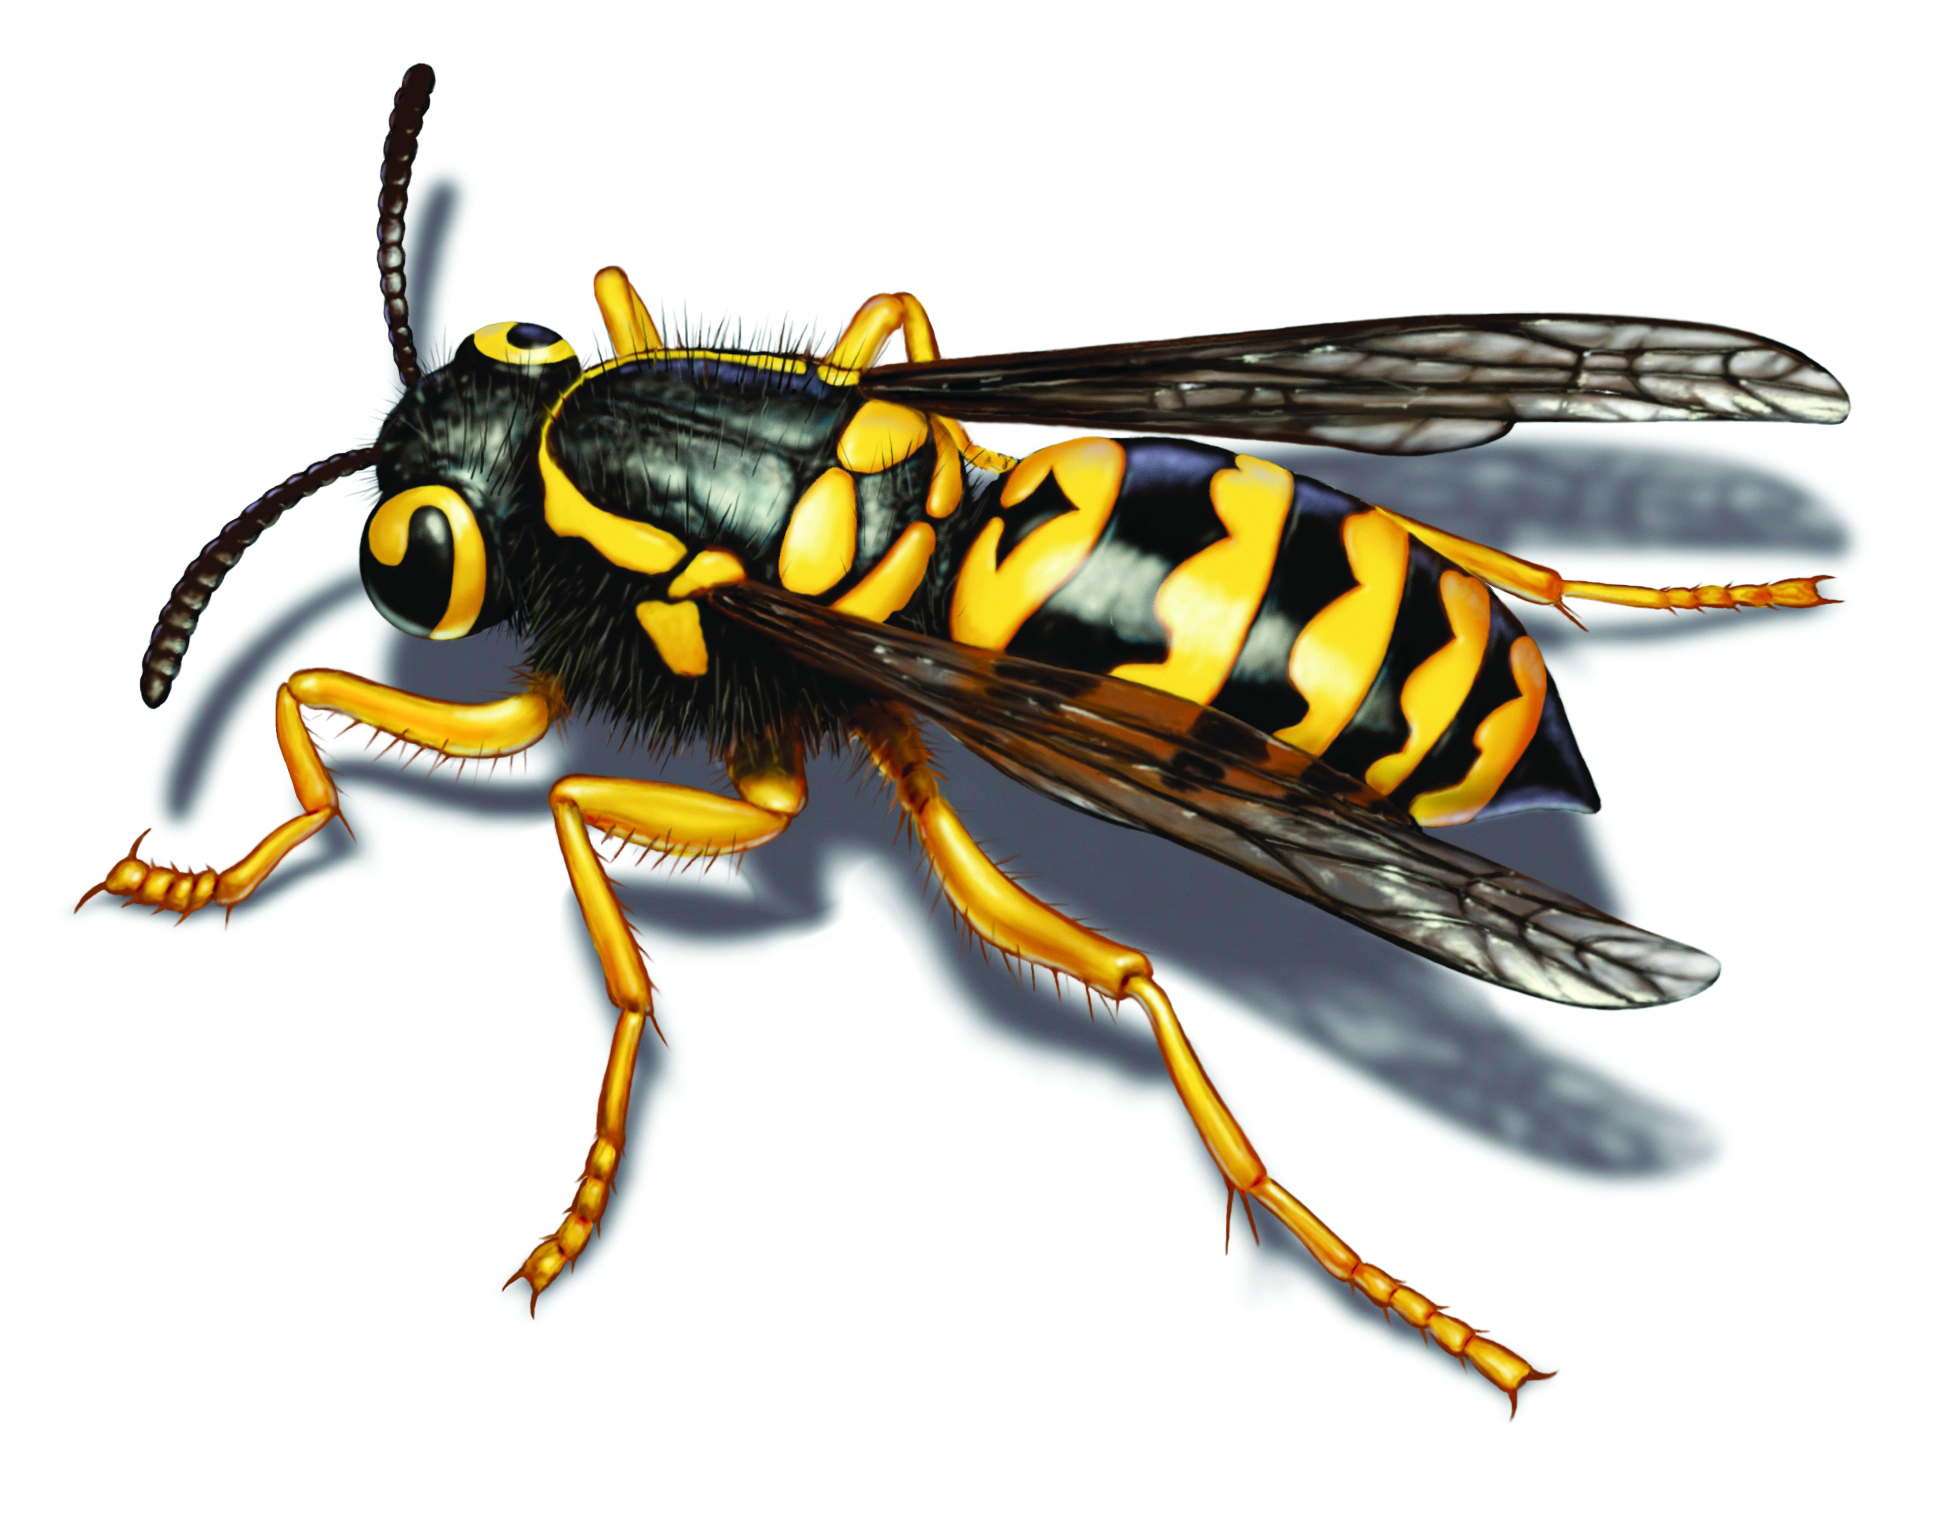 Yellow Jacket Removal - Get Rid of Yellow Jackets